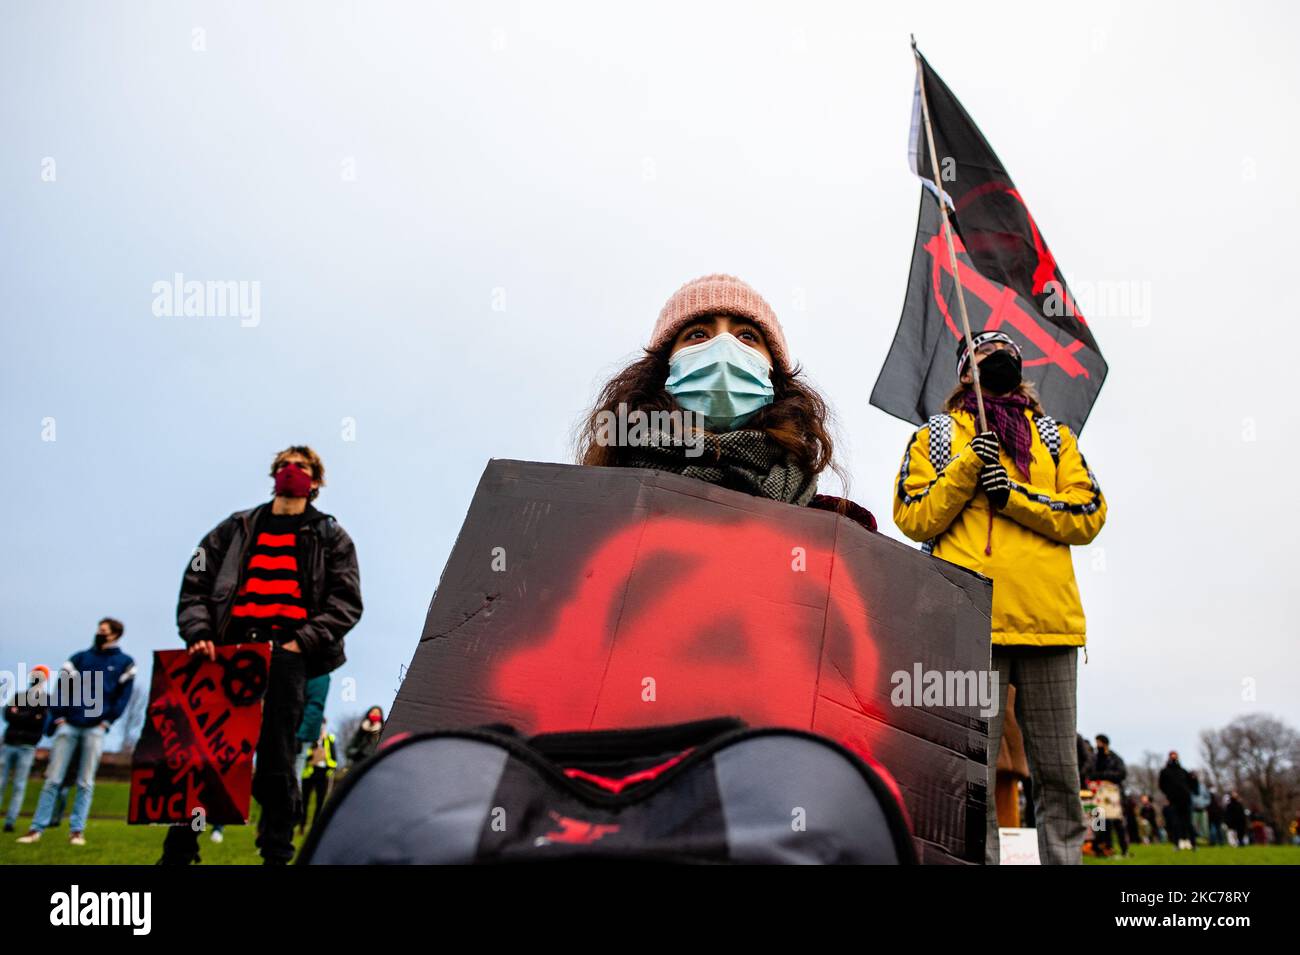 A woman is sitting on the floor while holding an Anarchist placard, during a demonstration against fascism in Amsterdam, Netherlands on January 10th, 2021. After the 'attempted coup' at the US Capitol building that left five people dead, several organizations in Amsterdam organized a demonstration against fascism. Hundreds of people gathered at the Westerpark to protest against the rise of the far-right movement in Europe and in the USA. (Photo by Romy Arroyo Fernandez/NurPhoto) Stock Photo